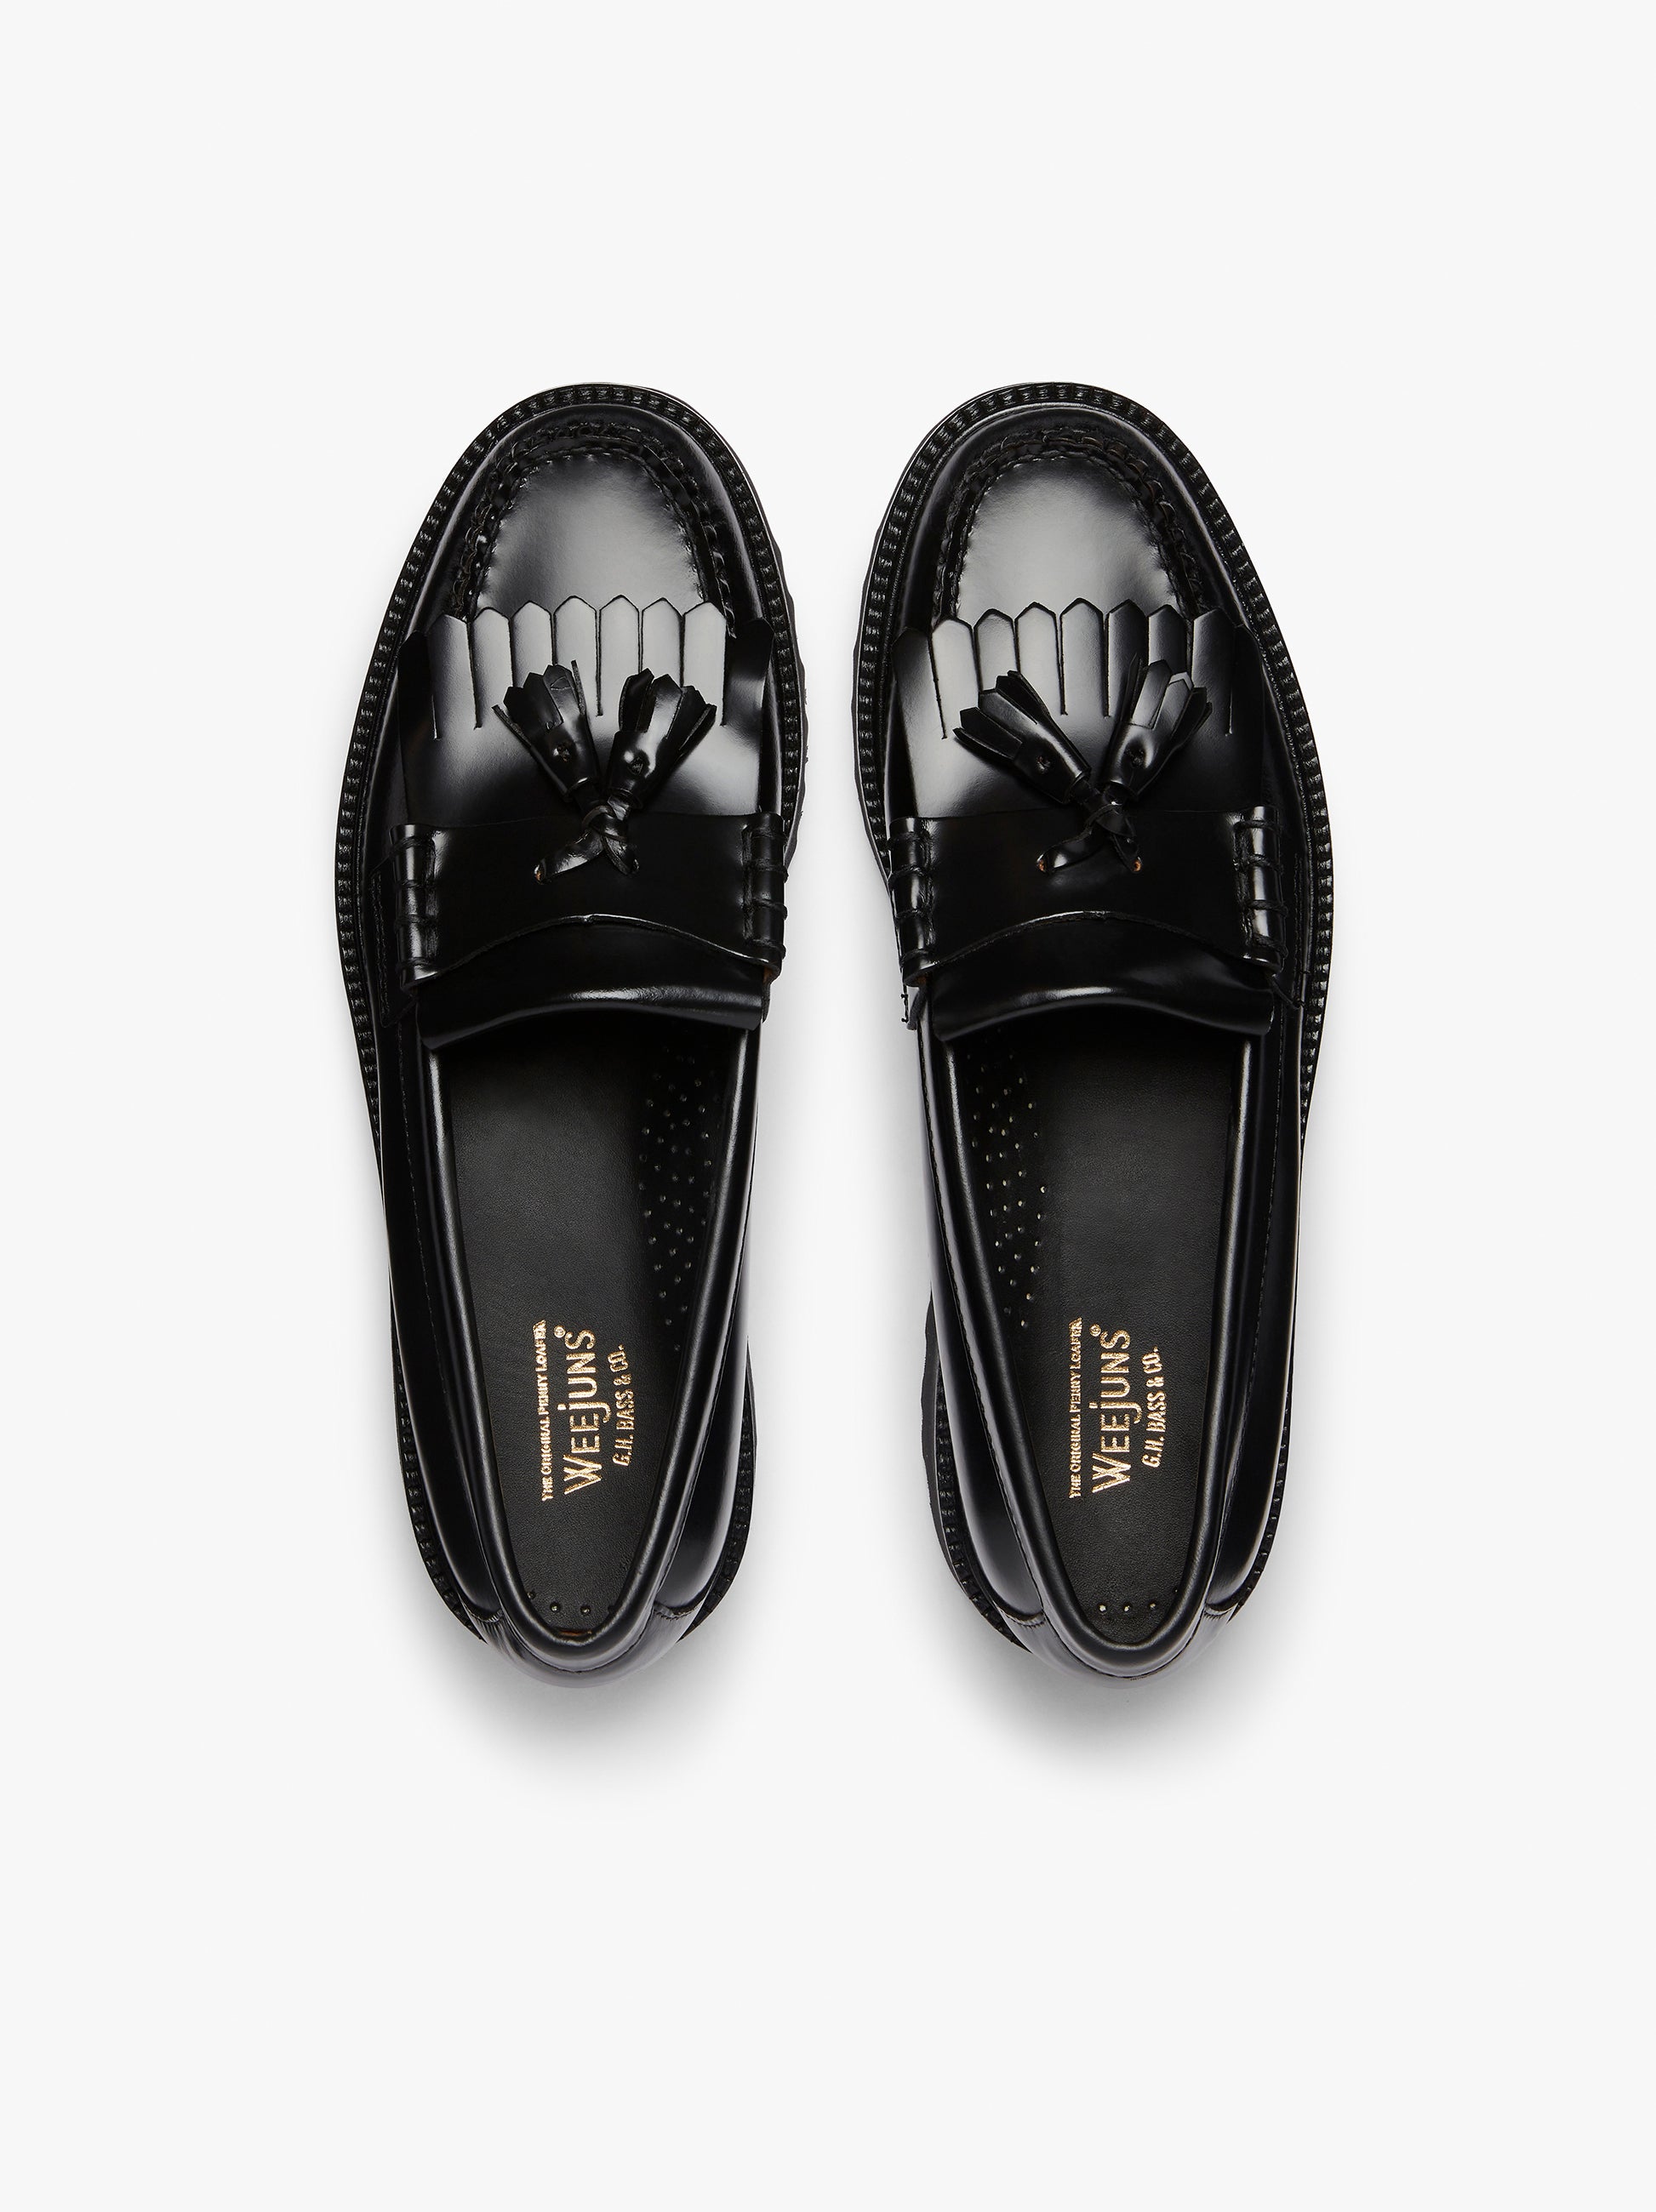 Kiltie Loafers Mens | Black Leather Loafers – G.H.BASS 1876